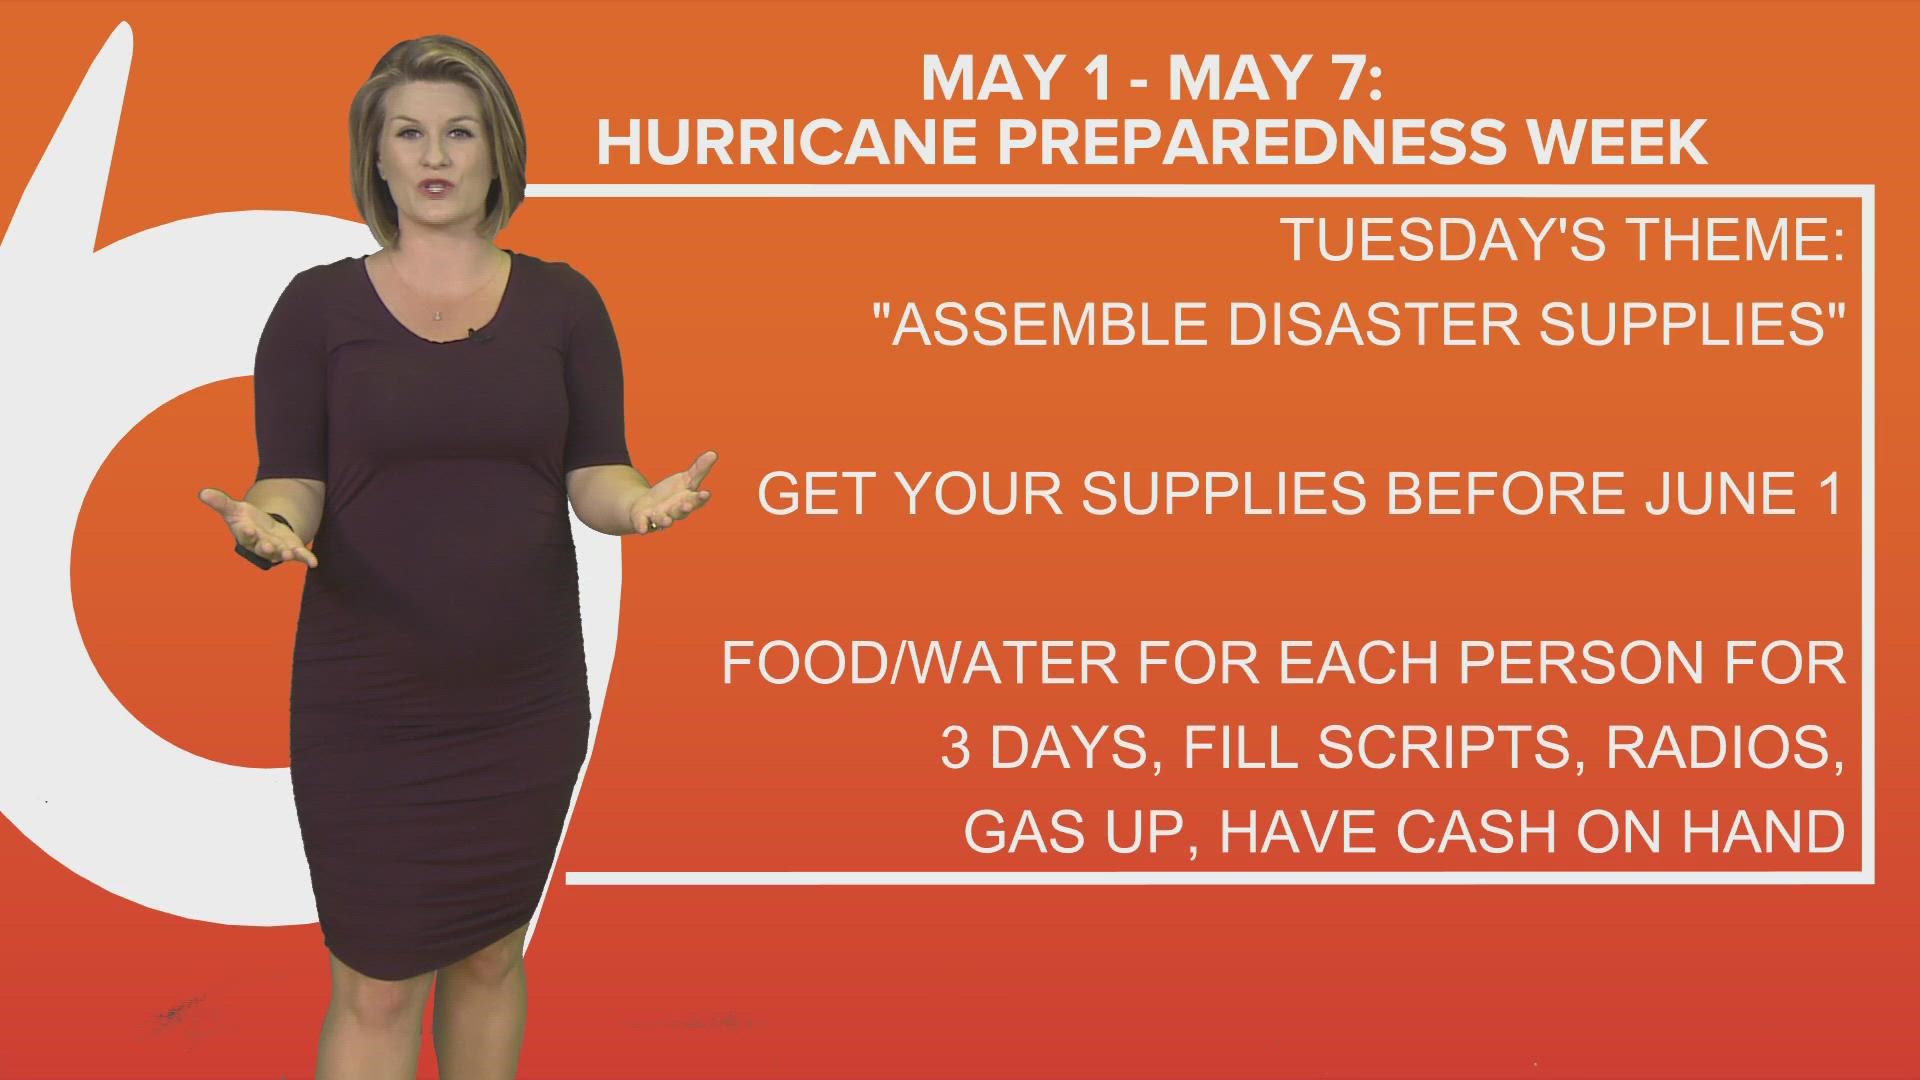 Whether you’re evacuating or not, you’re going to need supplies not just to get through the storm but for the potentially lengthy and unpleasant aftermath.